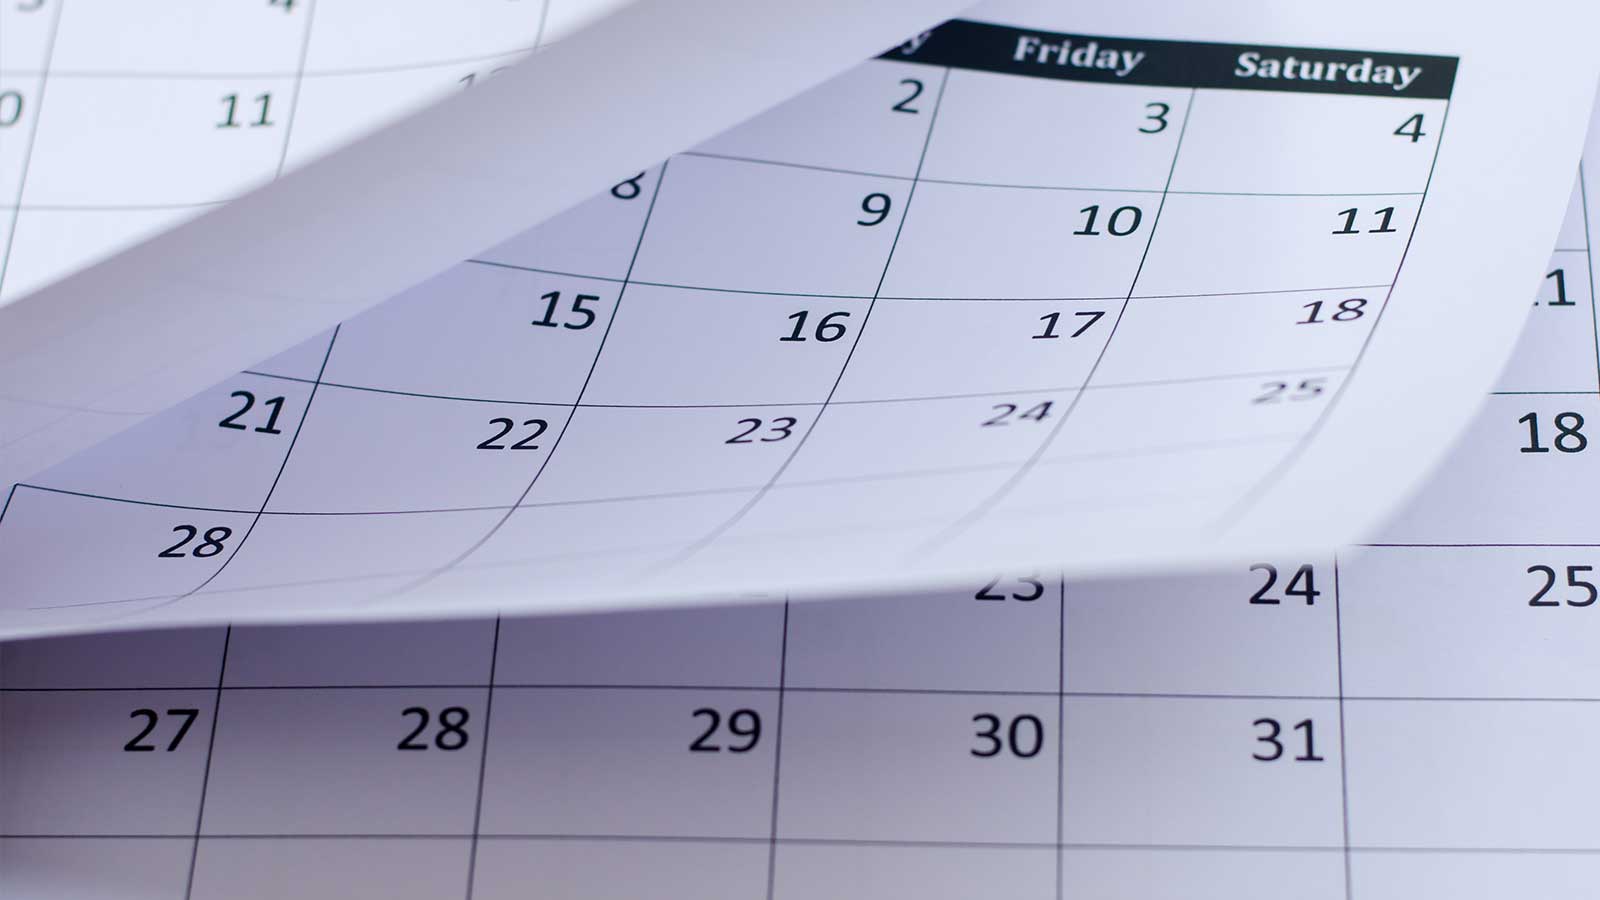 Empowering Employees and Managers to Efficiently Manage a Schedule